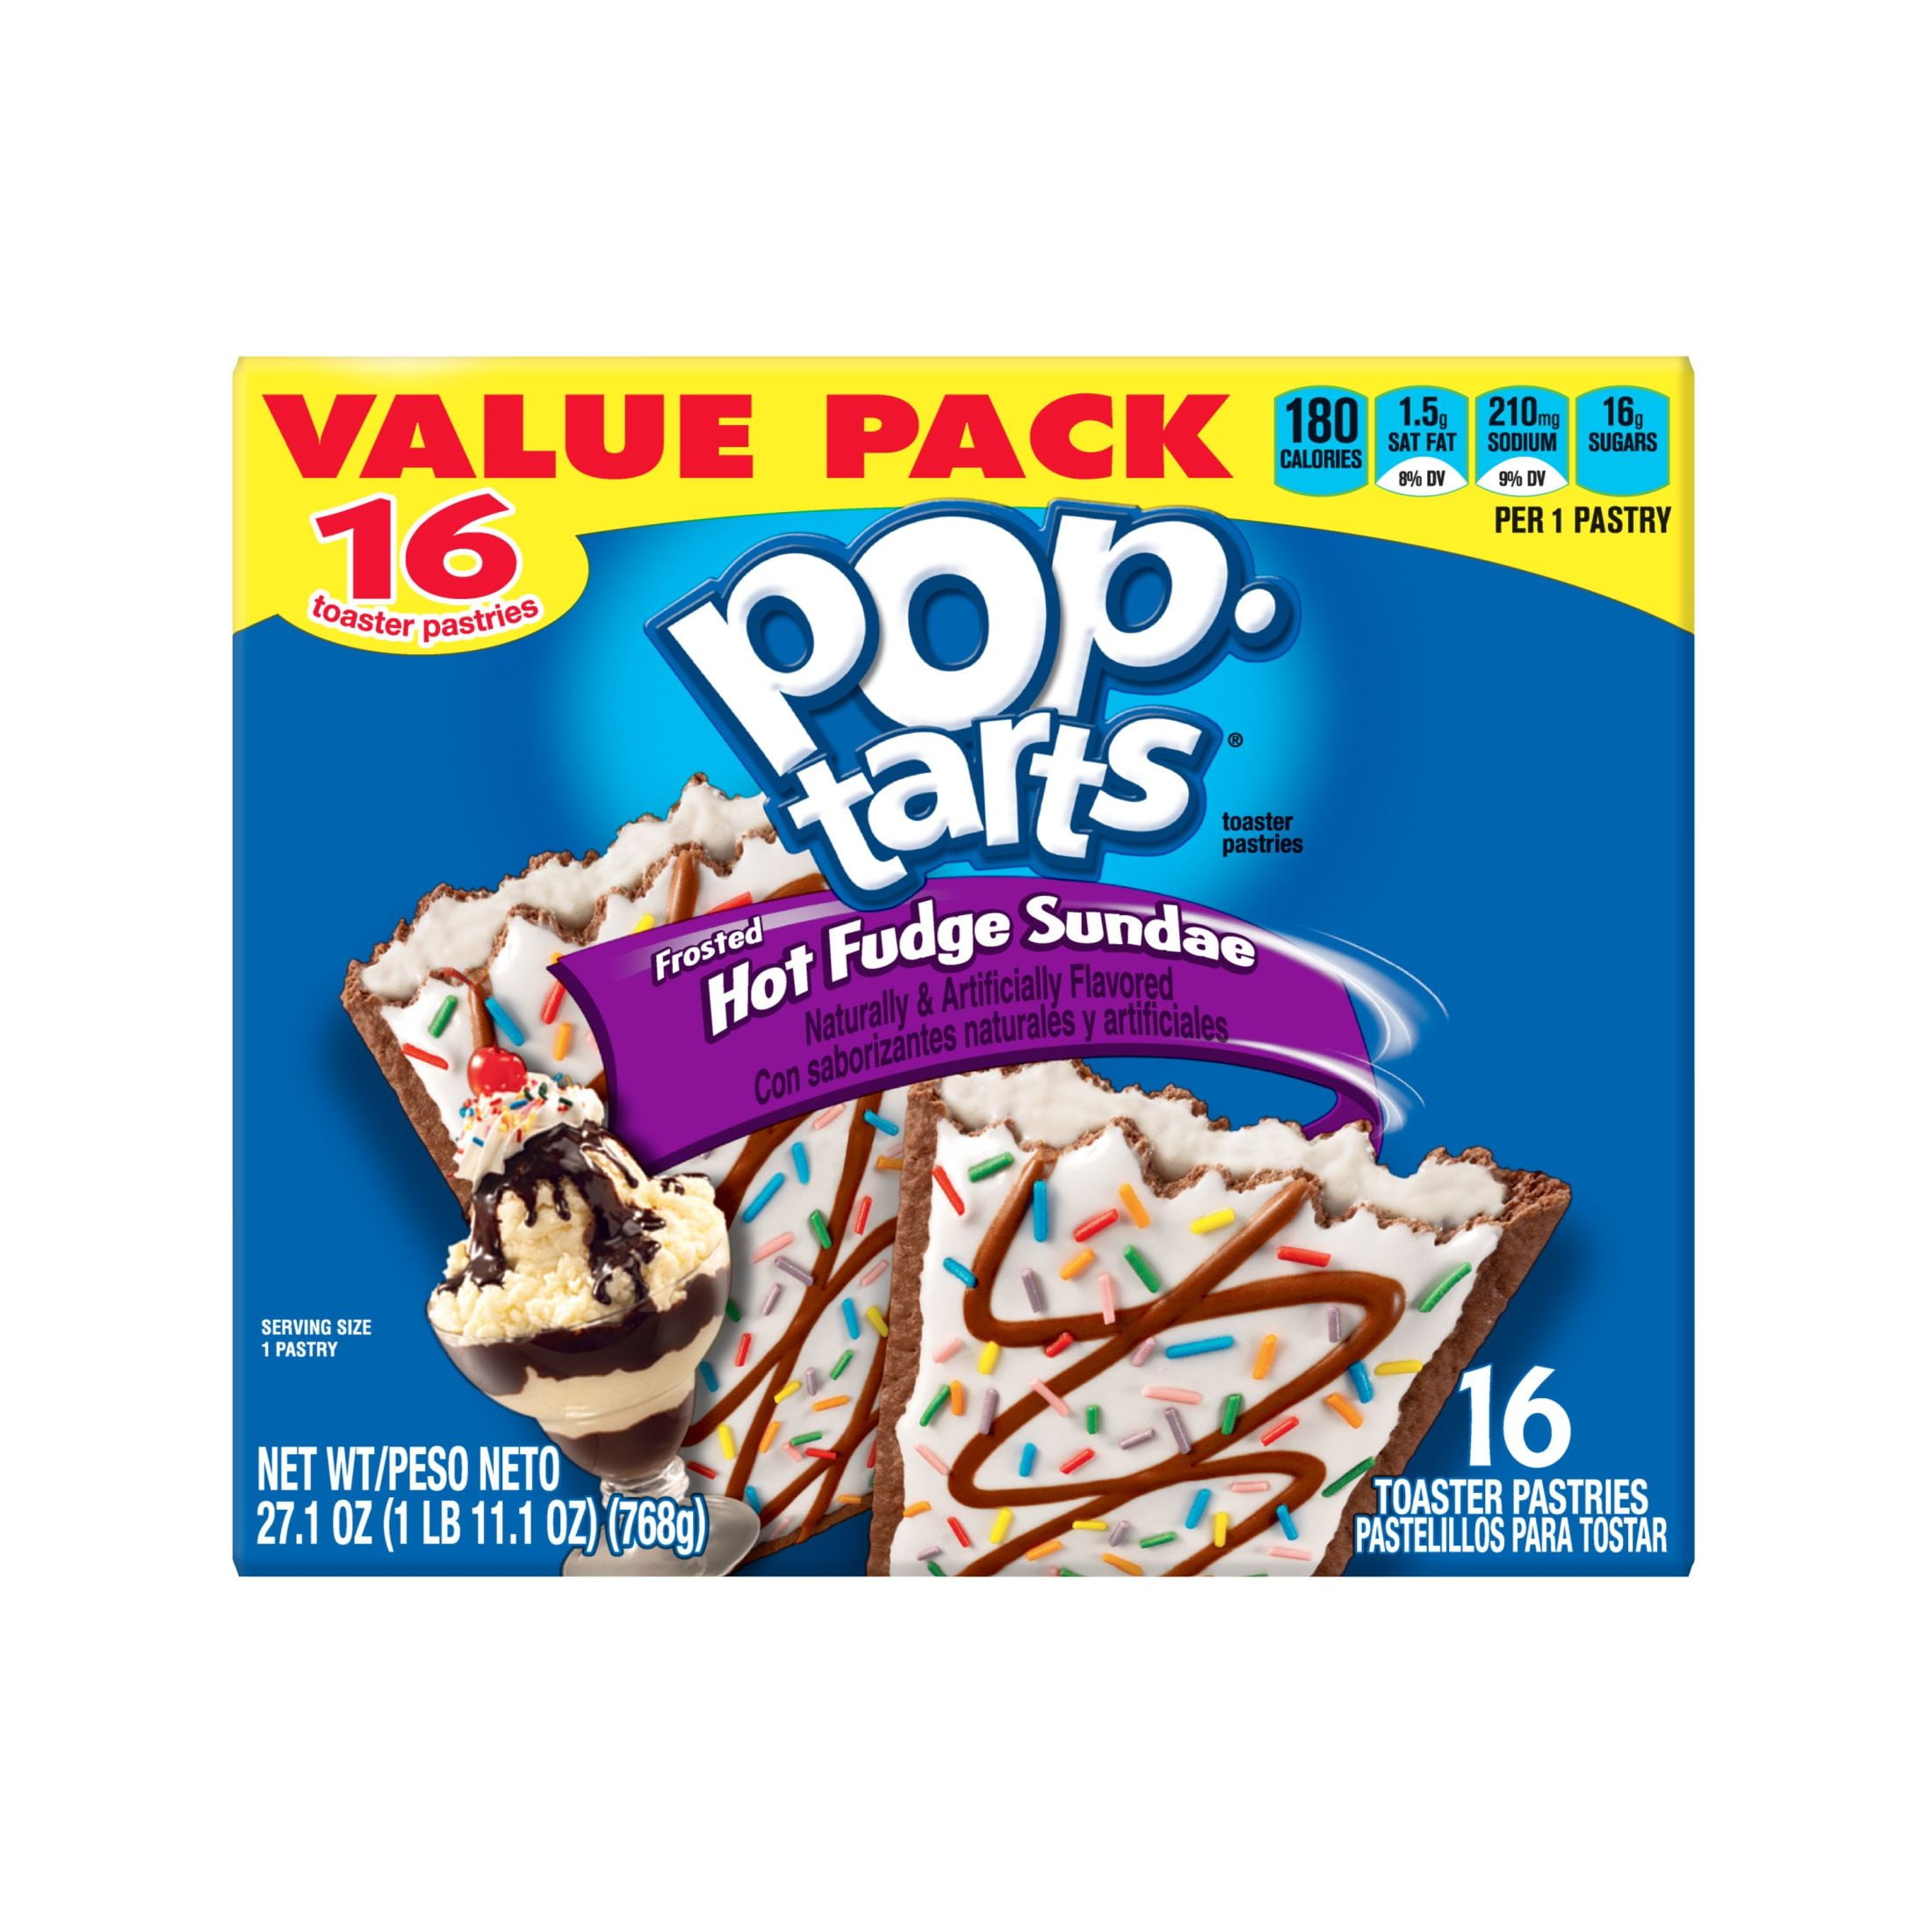 Pop-tarts Frosted Hot Fudge Sundae Pastries - 12ct/20.3oz : Target